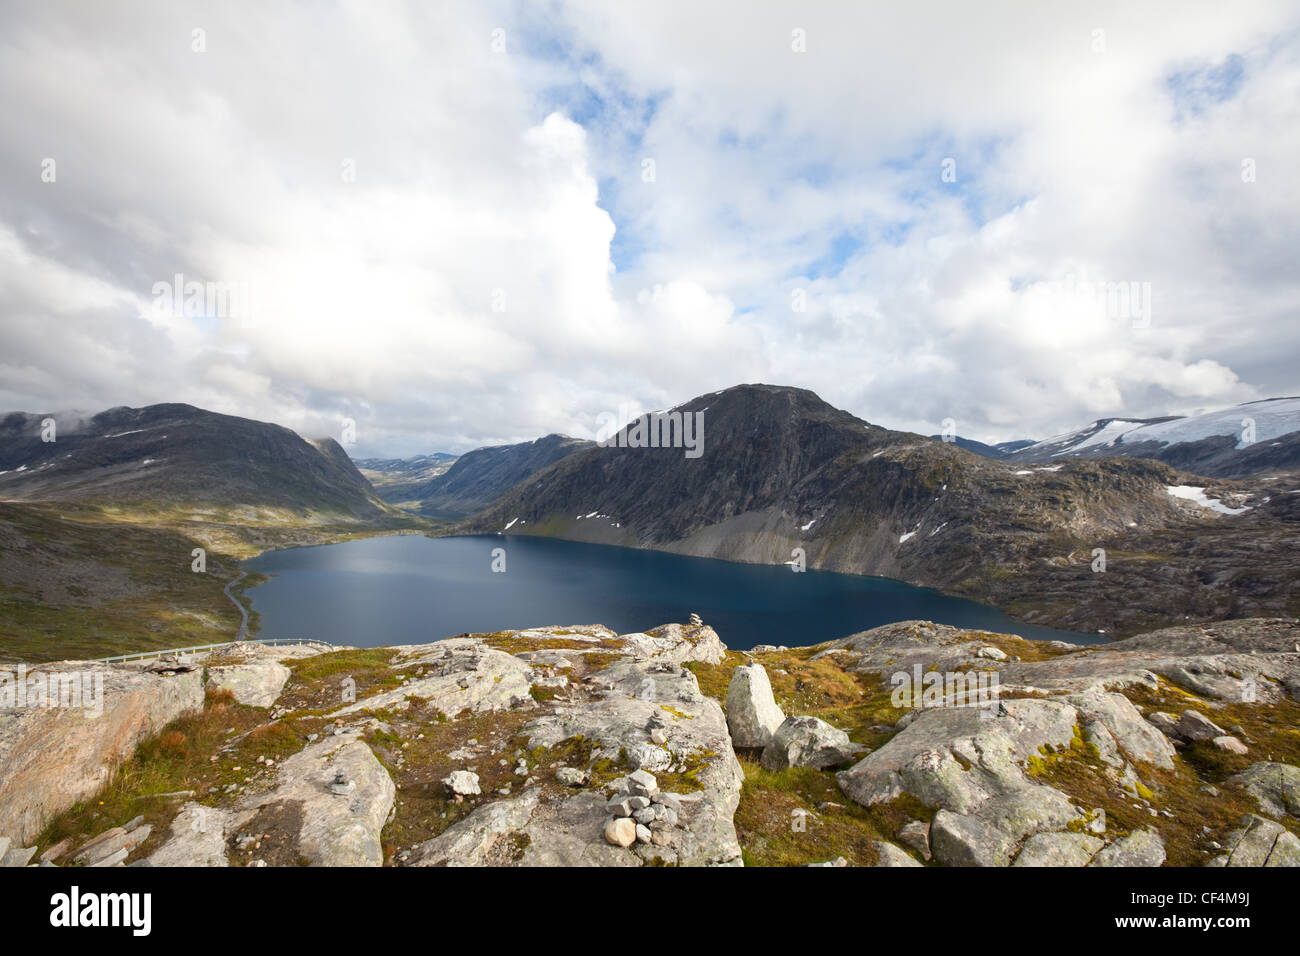 Norway landscapes Stock Photo